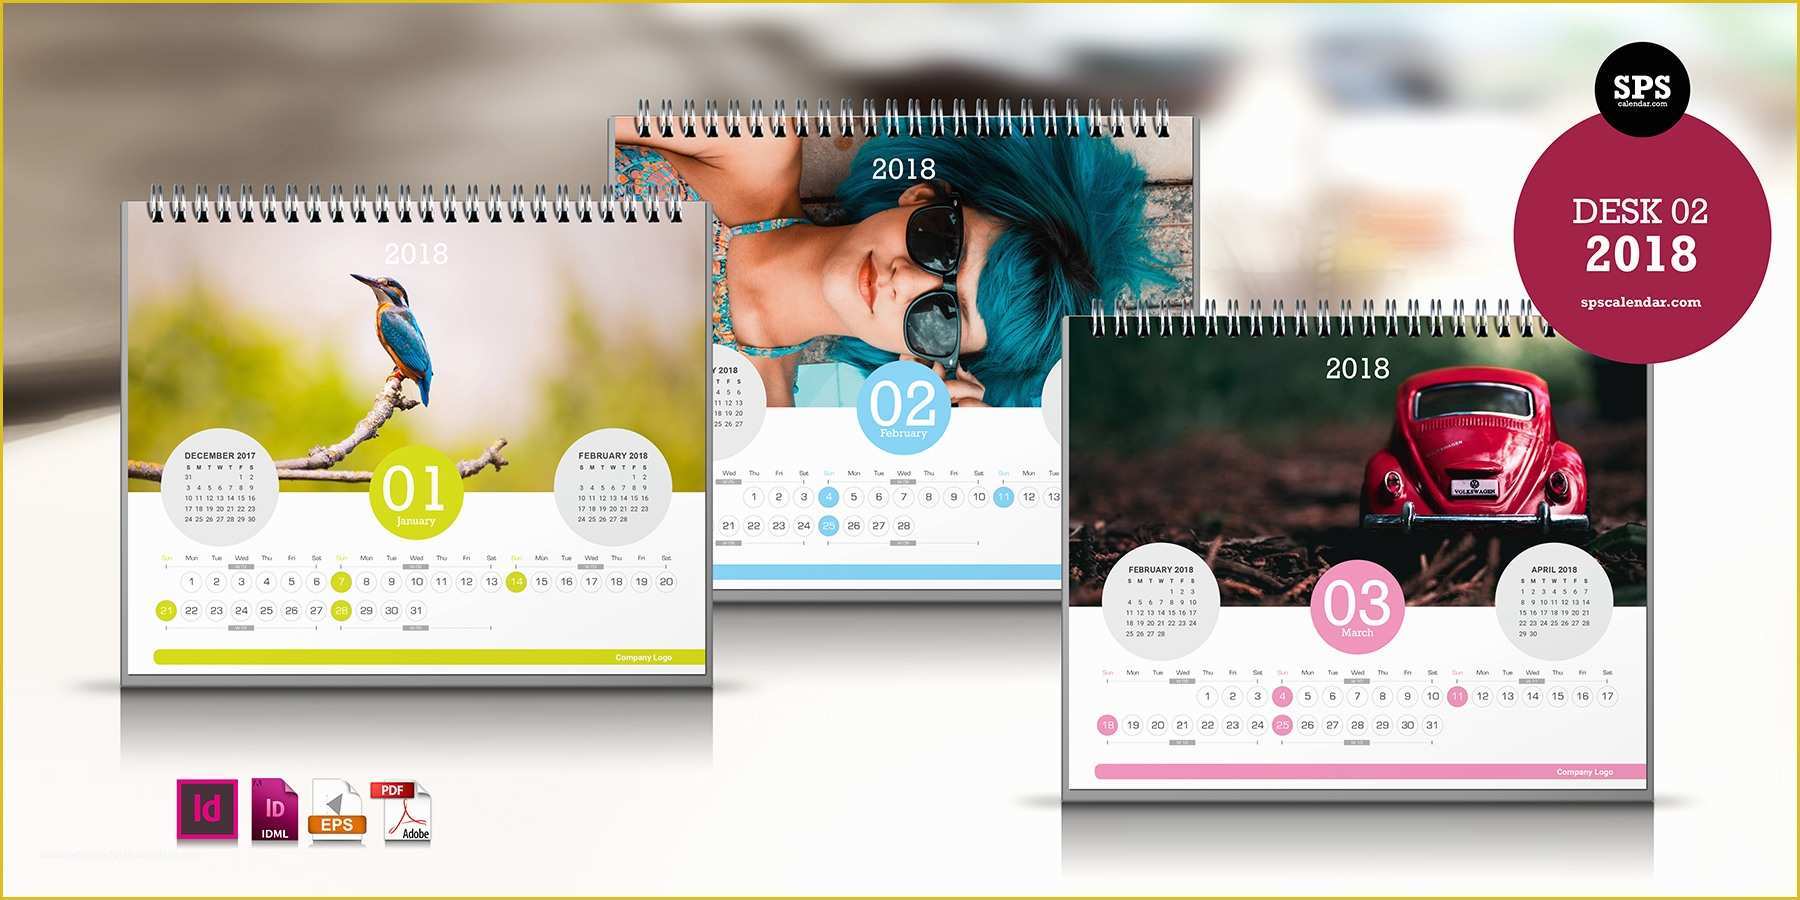 Free Indesign Calendar Template 2018 Of Free 2018 Indesign Calendar Template Spscalendar